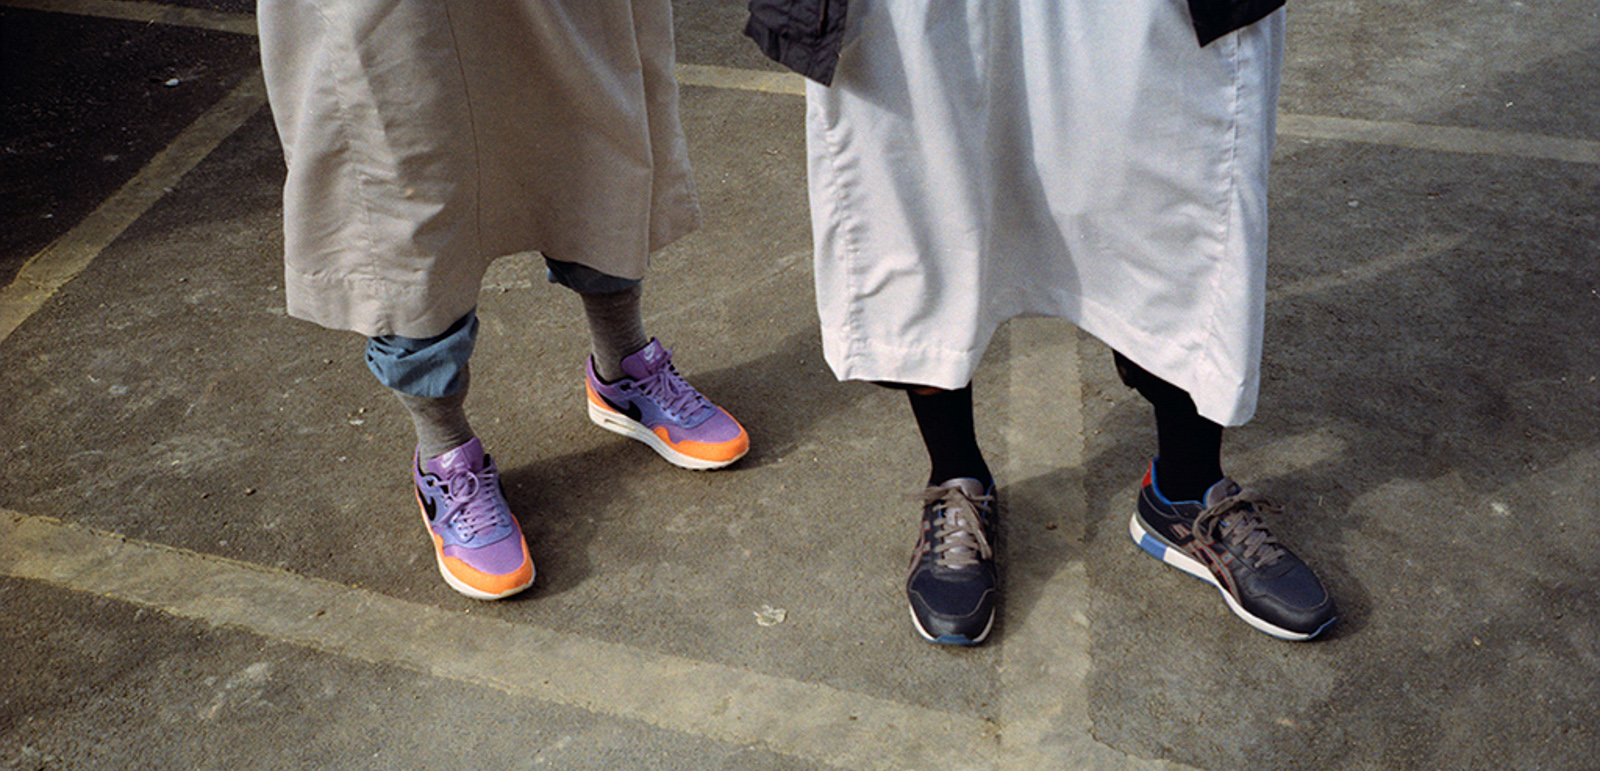 Muslim men wearing trainers/sneakers, photo courtesy of Toufic Beyhum